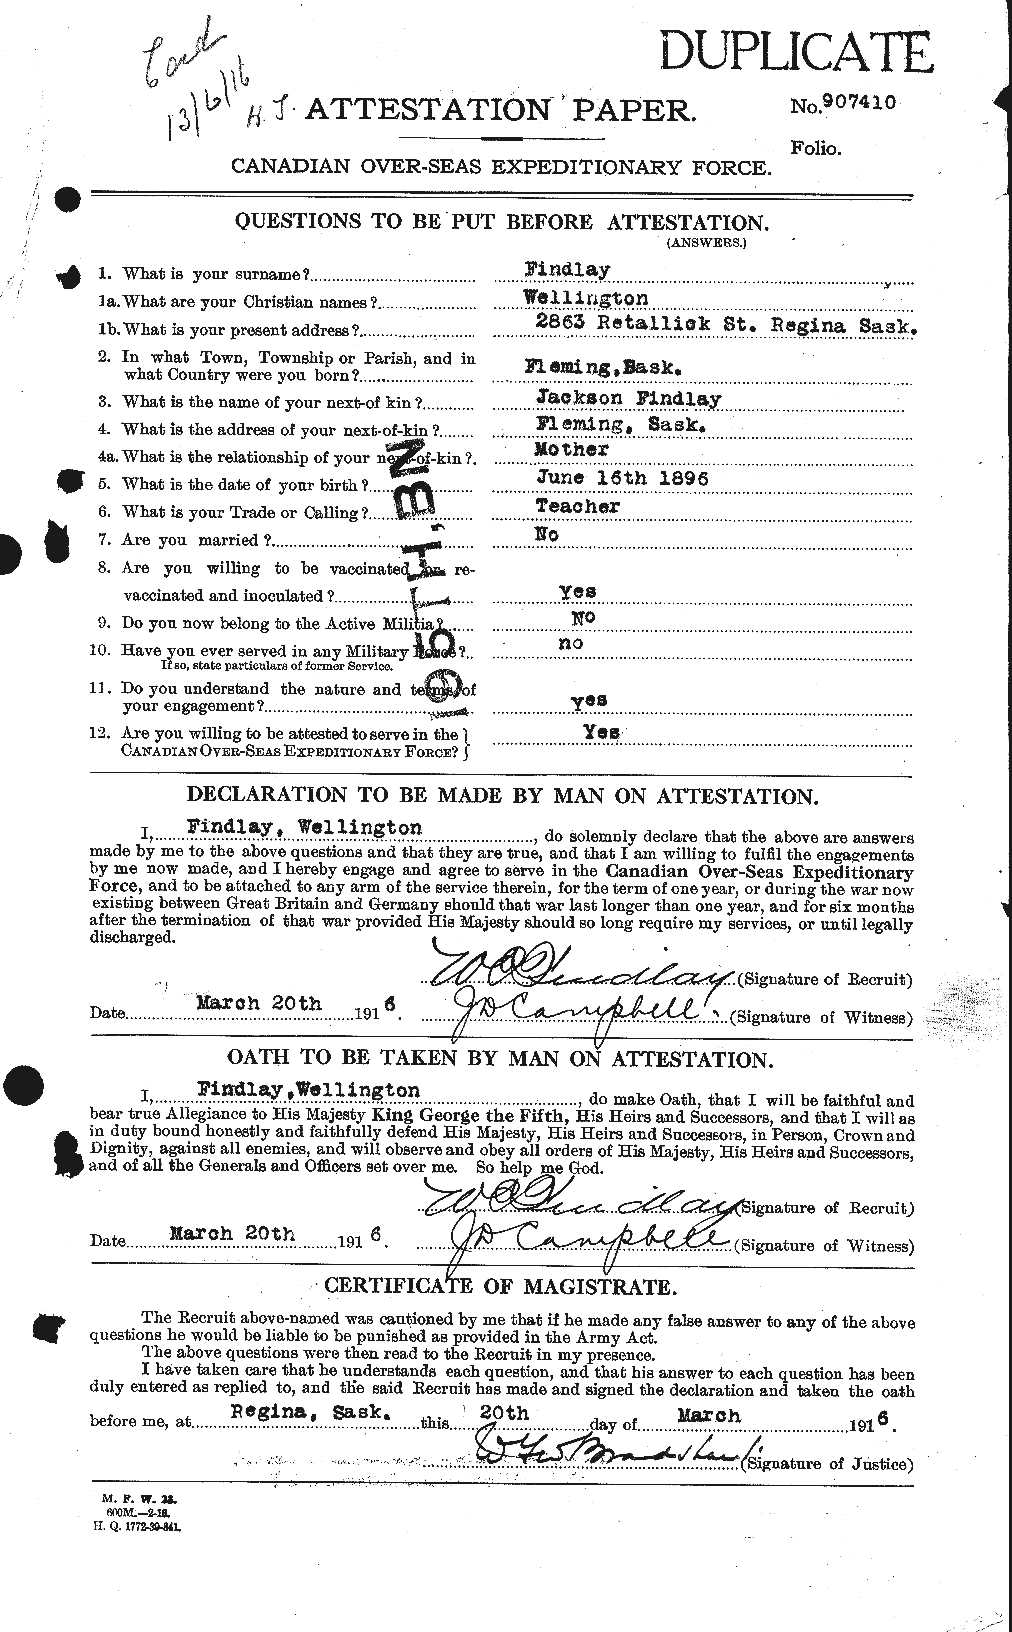 Personnel Records of the First World War - CEF 323885a